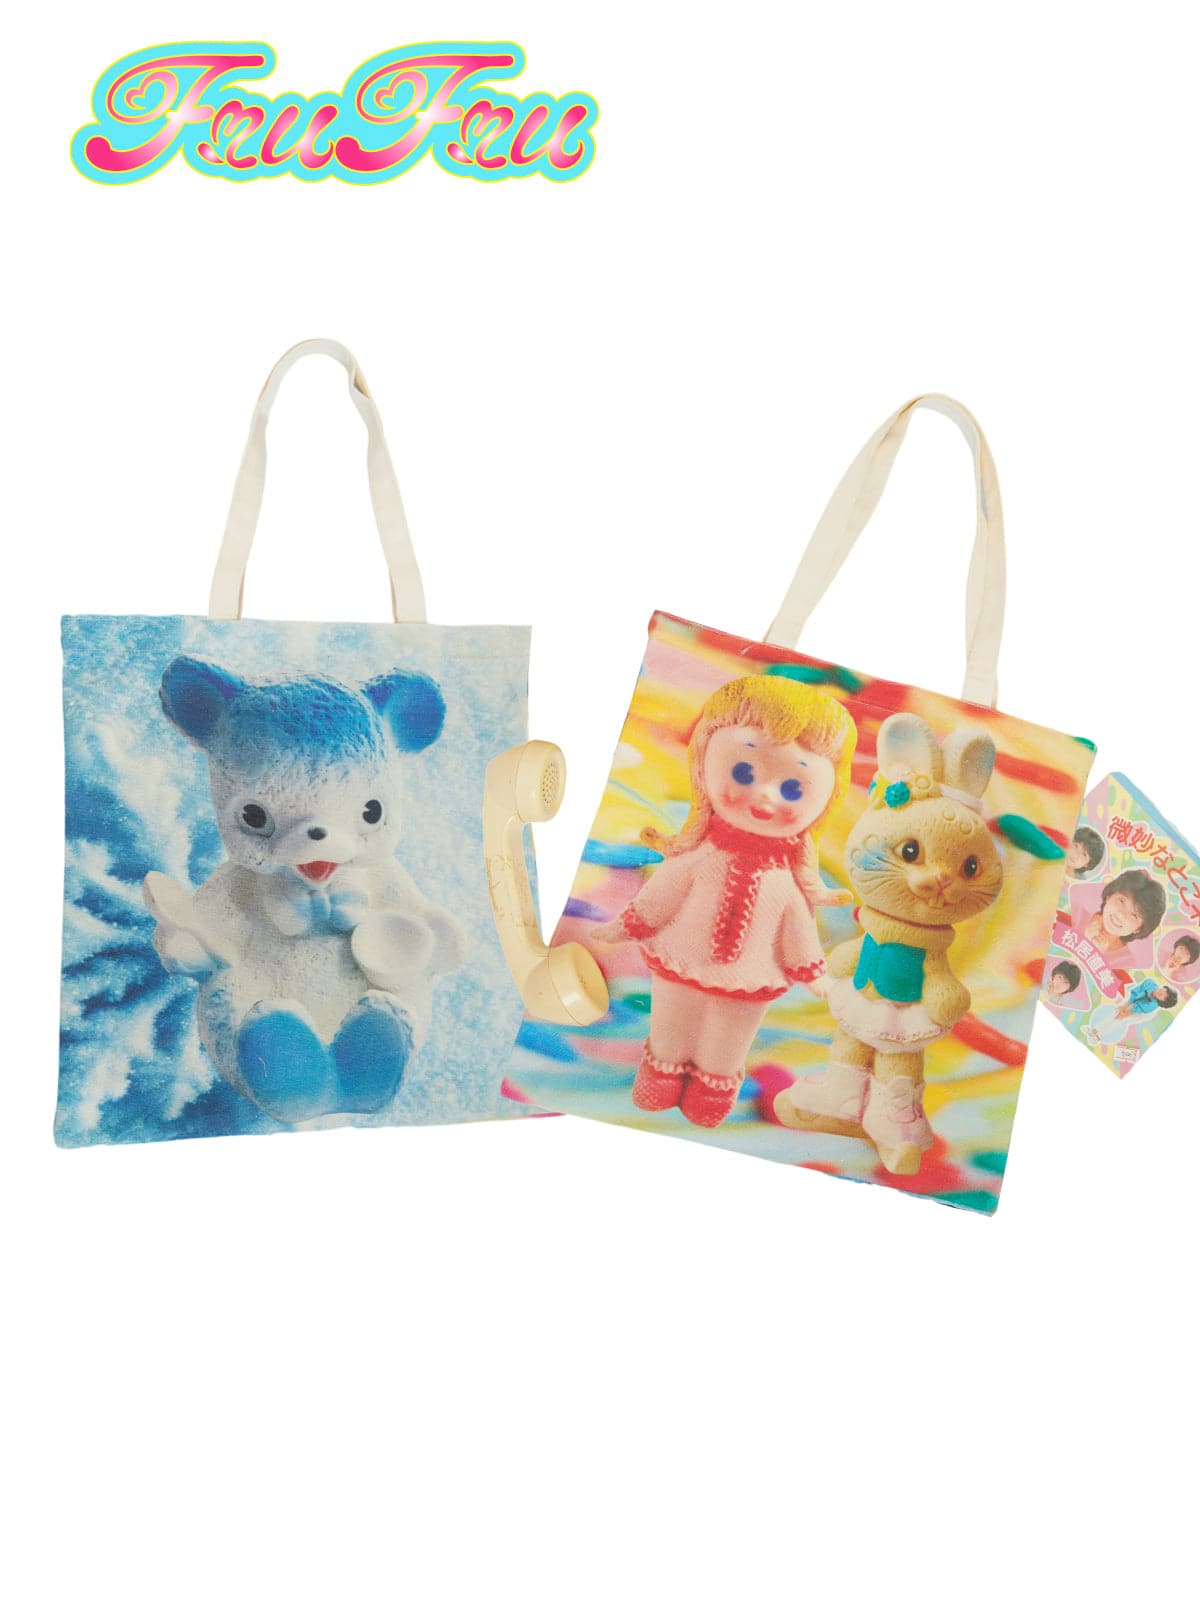 Cute Double-Sided Cartoon Print Vintage Toy Canvas Tote Bag - chiclara